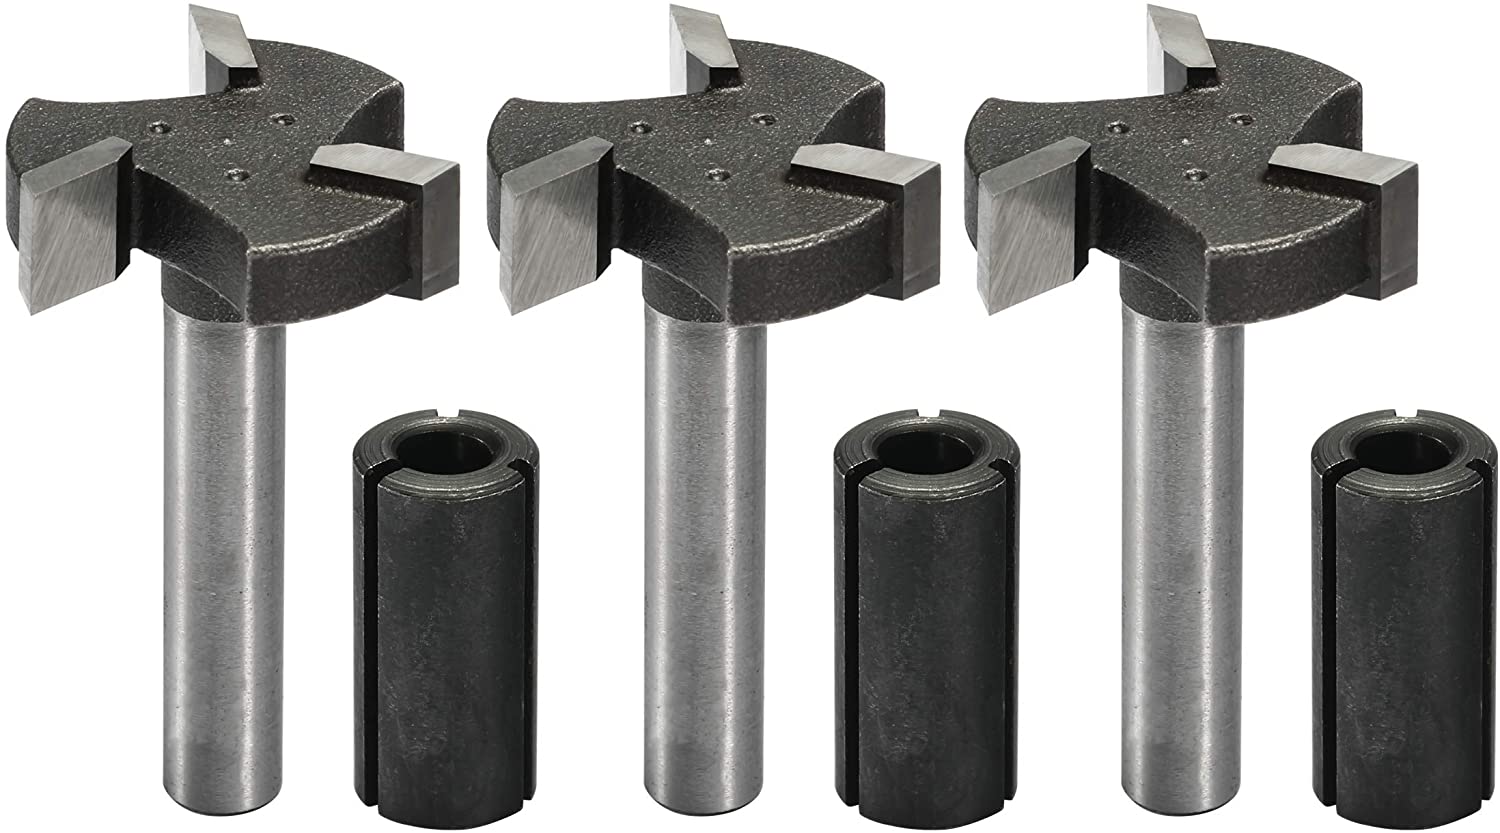 Genmitsu 3pcs 3-Flute CNC Spoilboard Surfacing Router Bits, 1/4'' Shank, 0.94'' Cutting Diameter, Slab Flattening Router Bits for Wood Working, RB03A